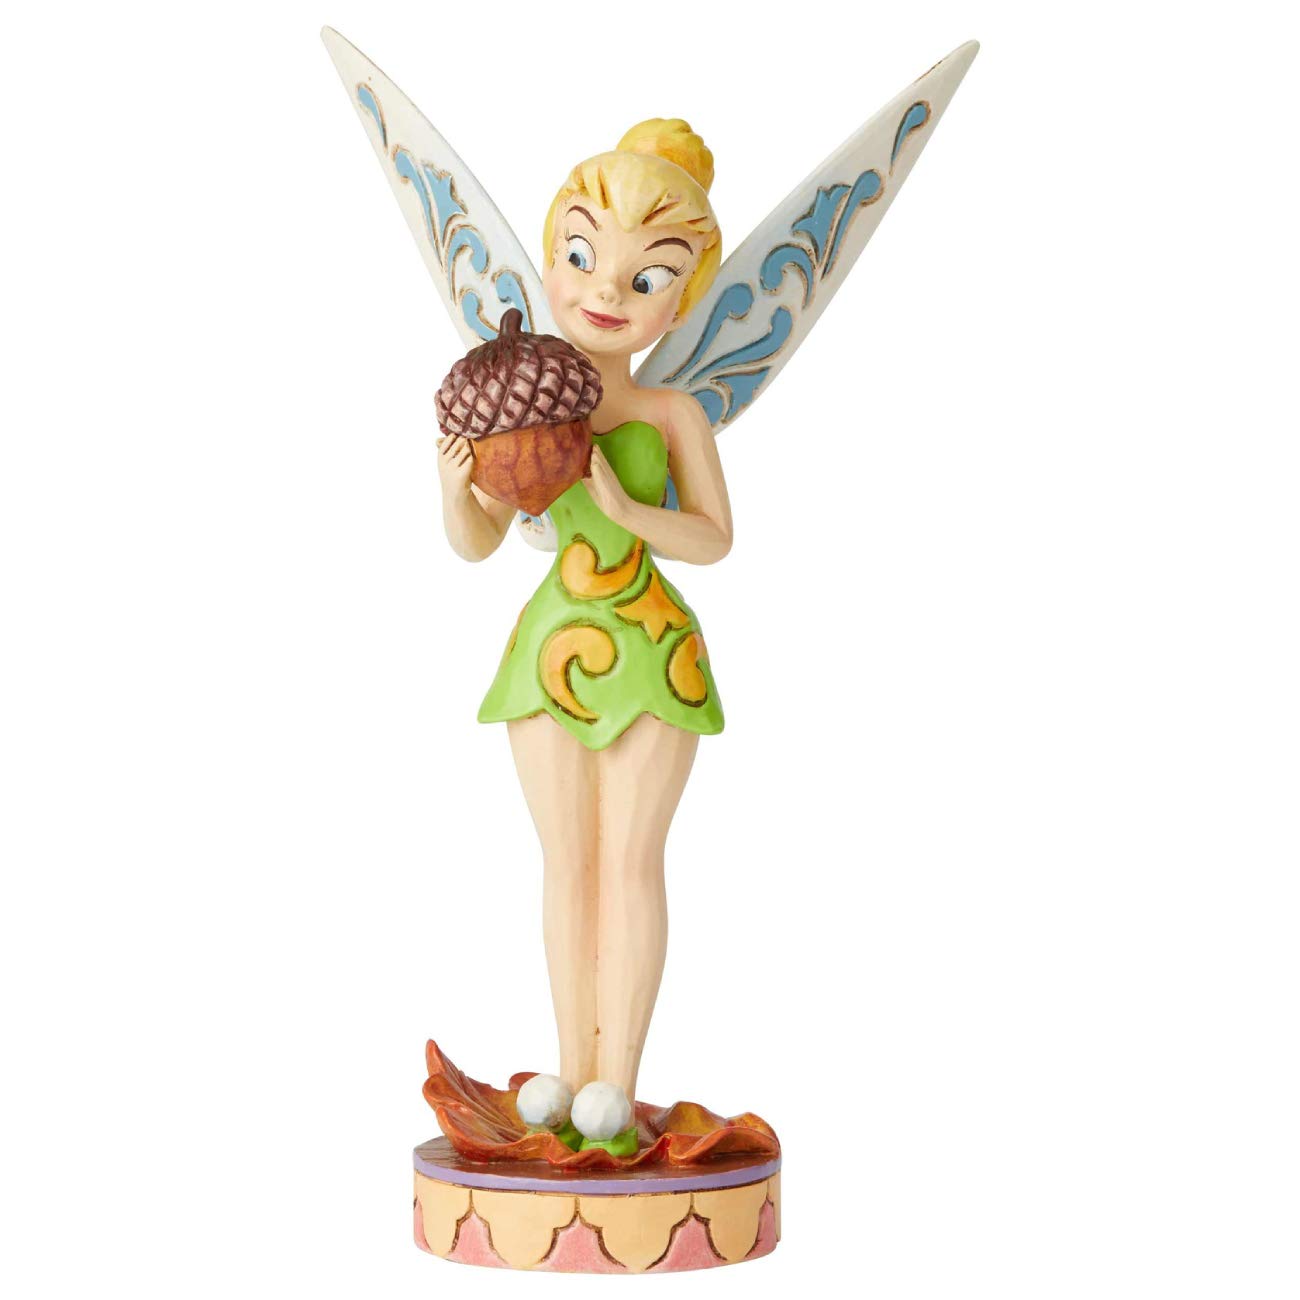 Enesco Disney Traditions by Jim Shore Peter Pan Tinkerbell with Acorn Figurine, 6.75 Inch, Multicolor